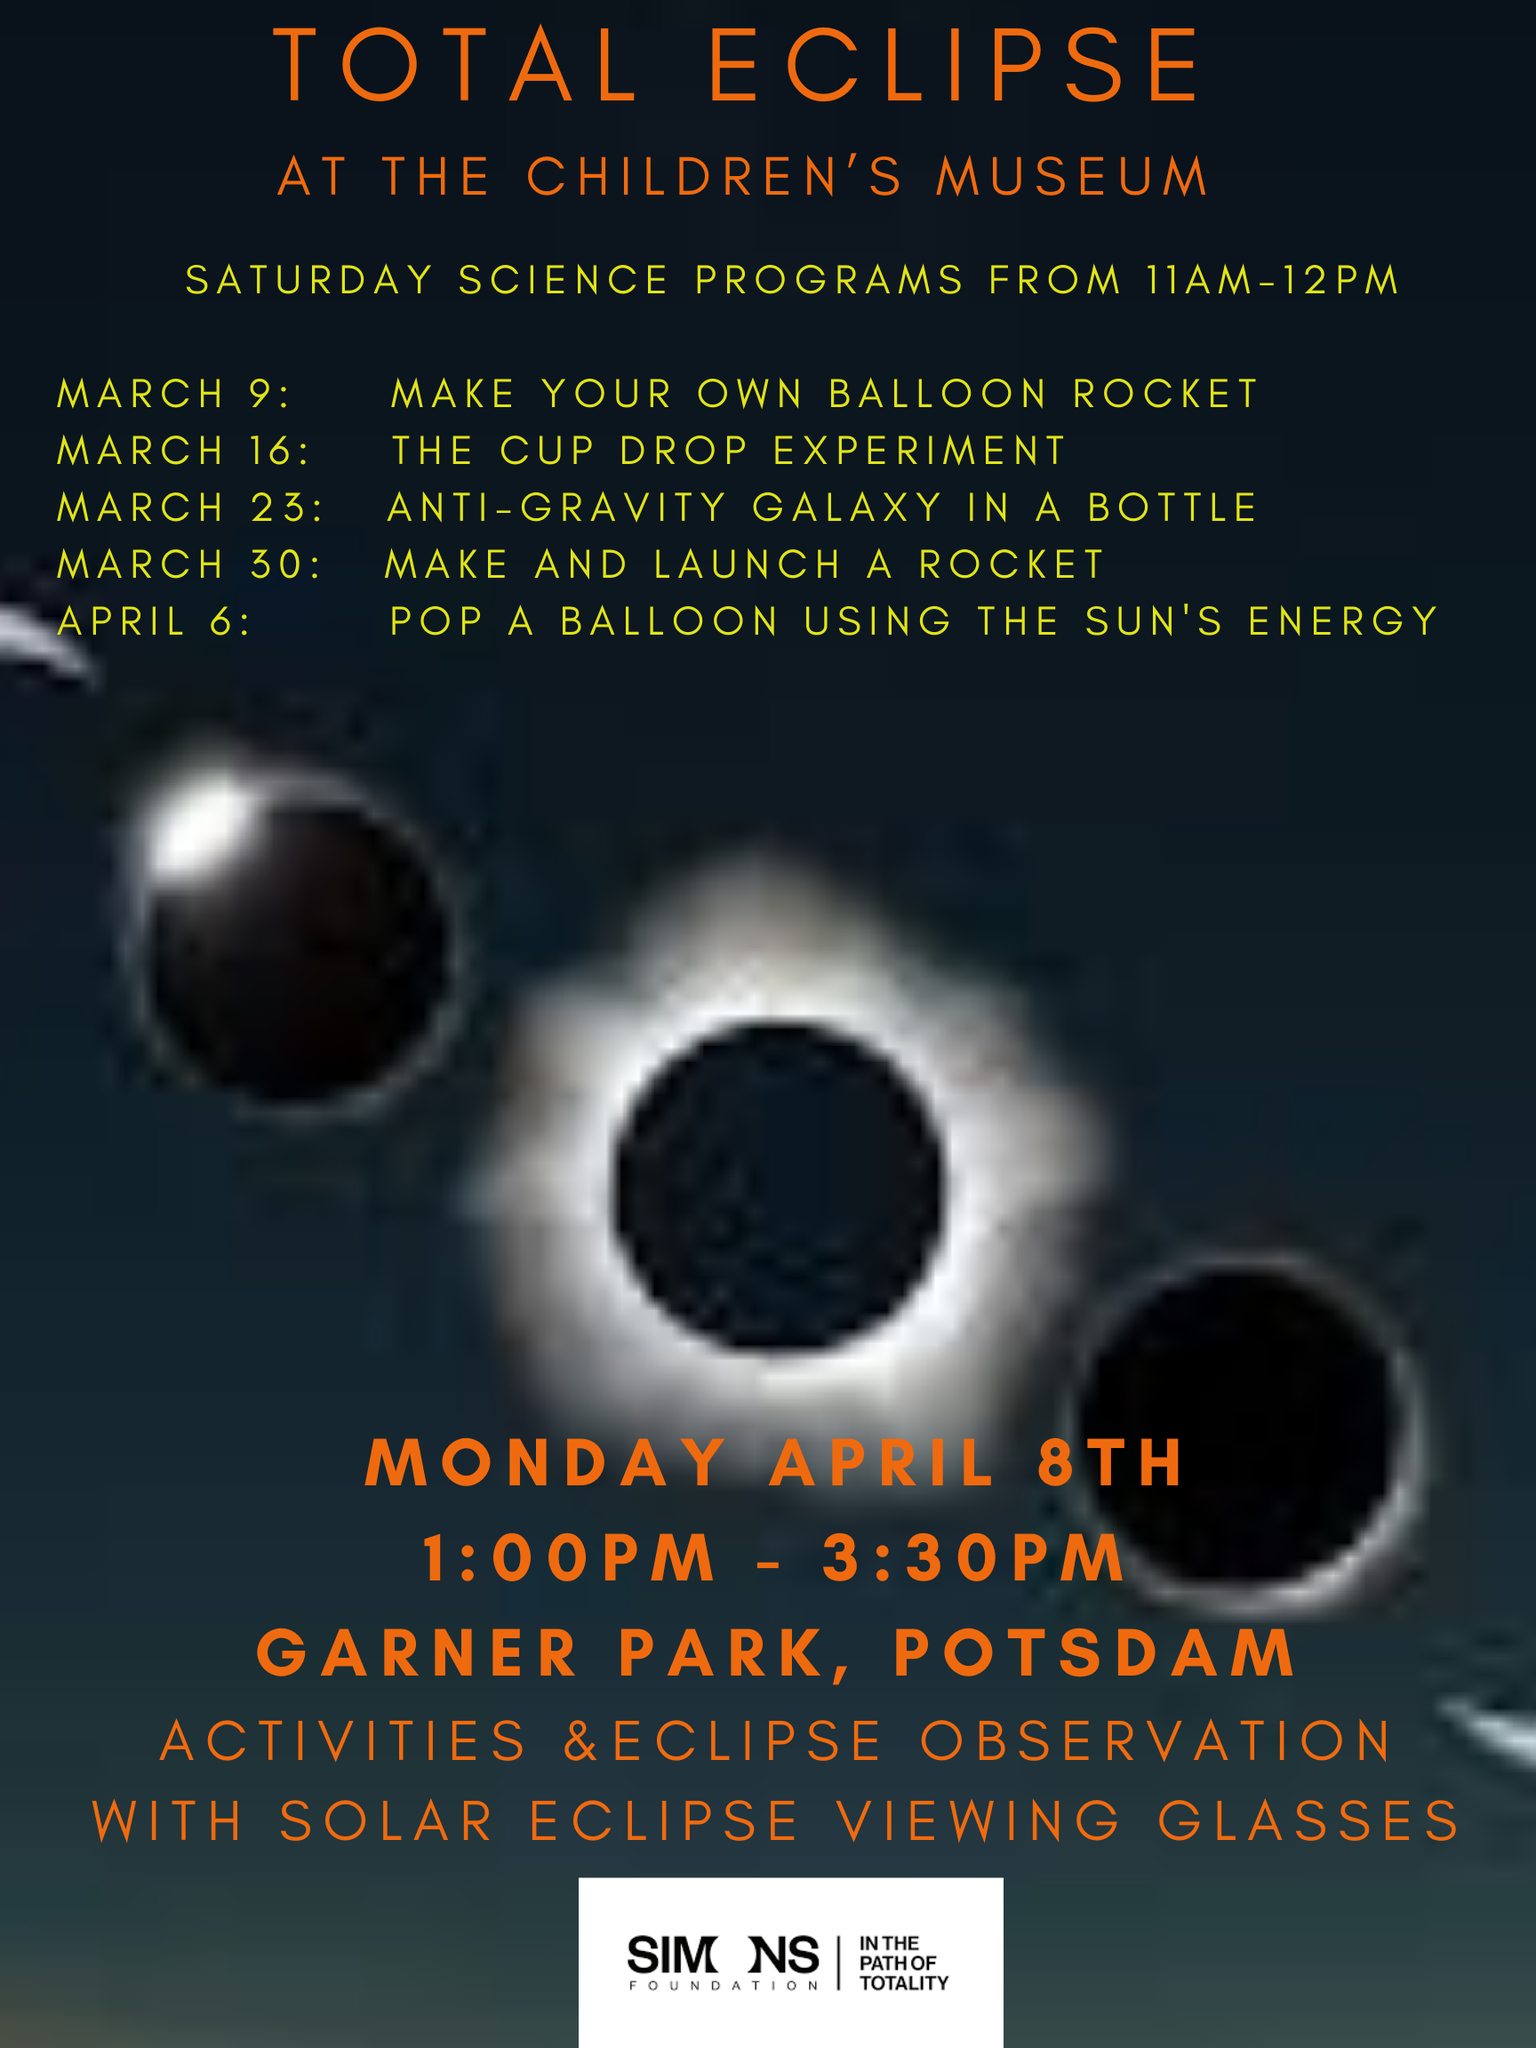 Total Eclipse Programming at NCCM every Saturday in March